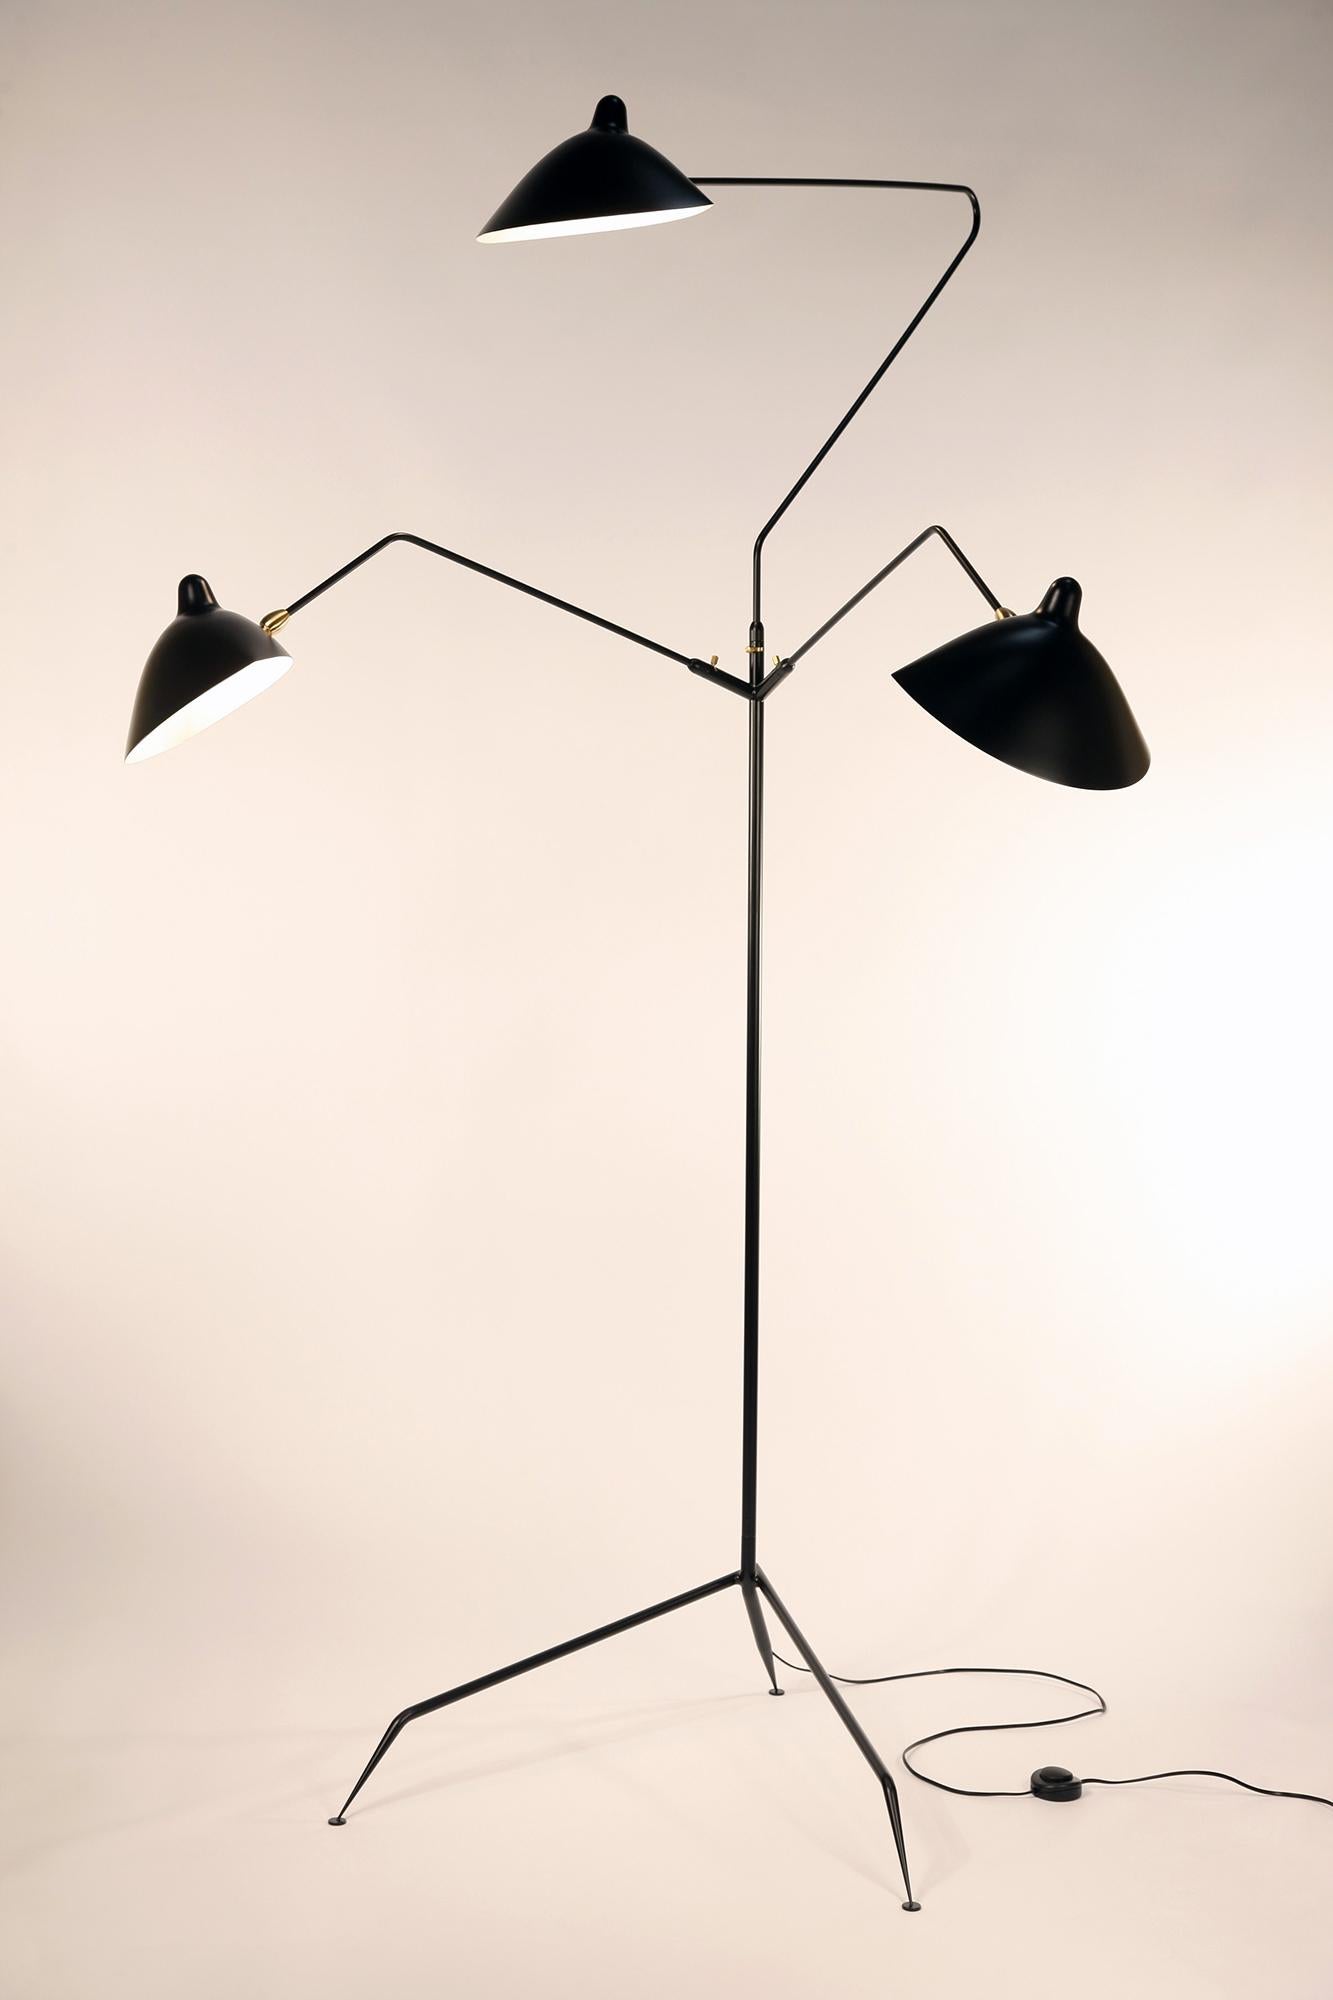 DESCRIPTION: 
This is the most versatile lamp of the Mouille collection. Each ‘chapeau’ shade can be oriented differently. Sculptural in form with three rotating arms, it stands majestically on a tripod base ending with tapered legs.